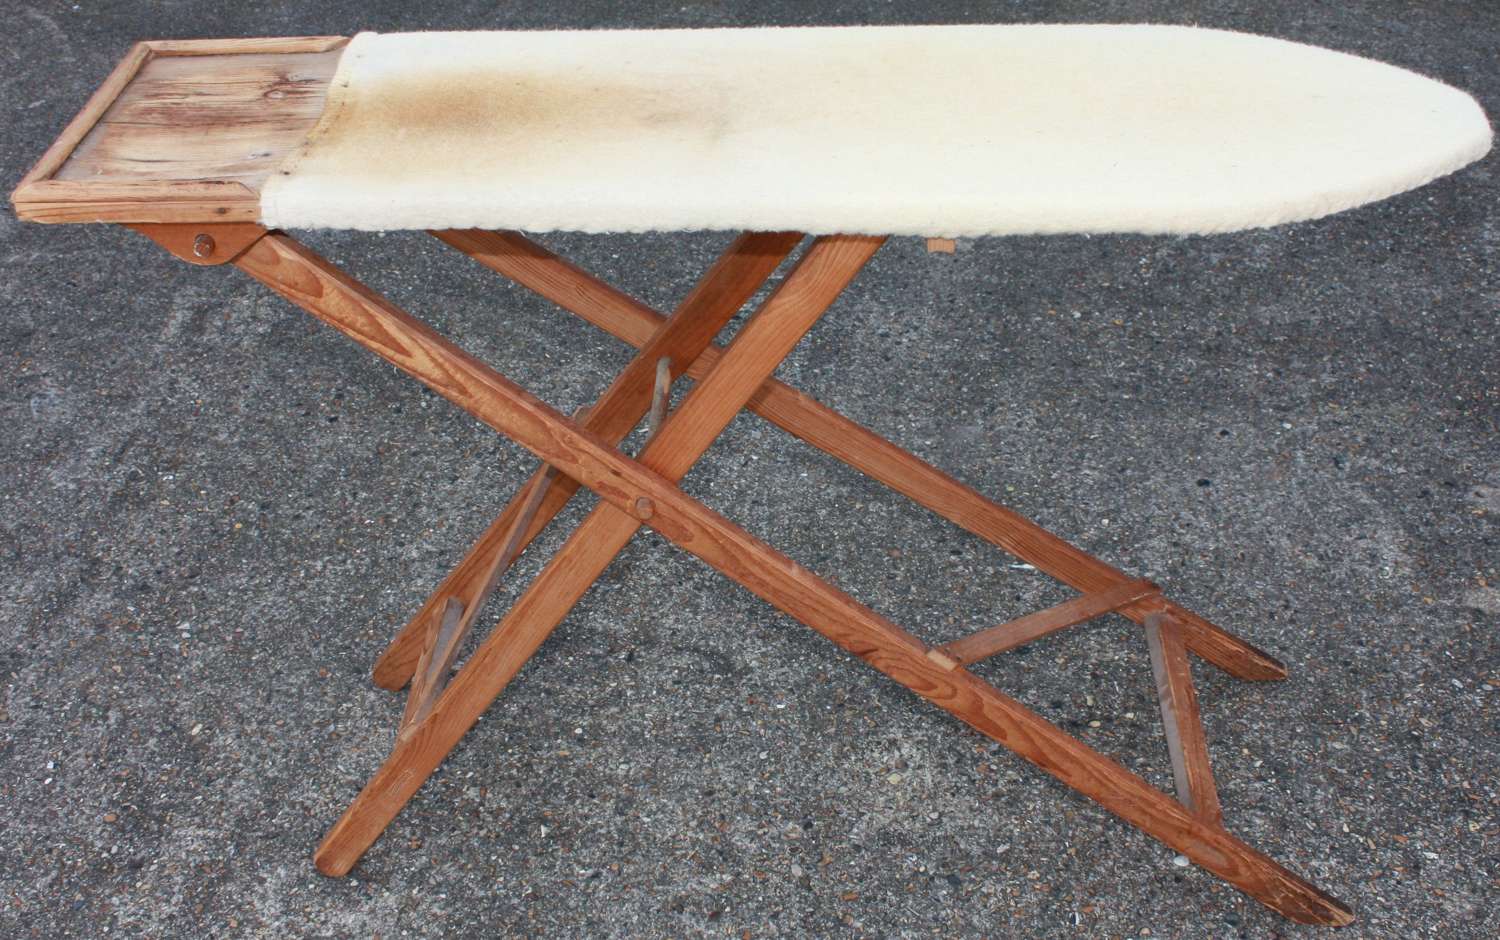 A WWII OR EARLIER PINE WOOD IRONING BOARD